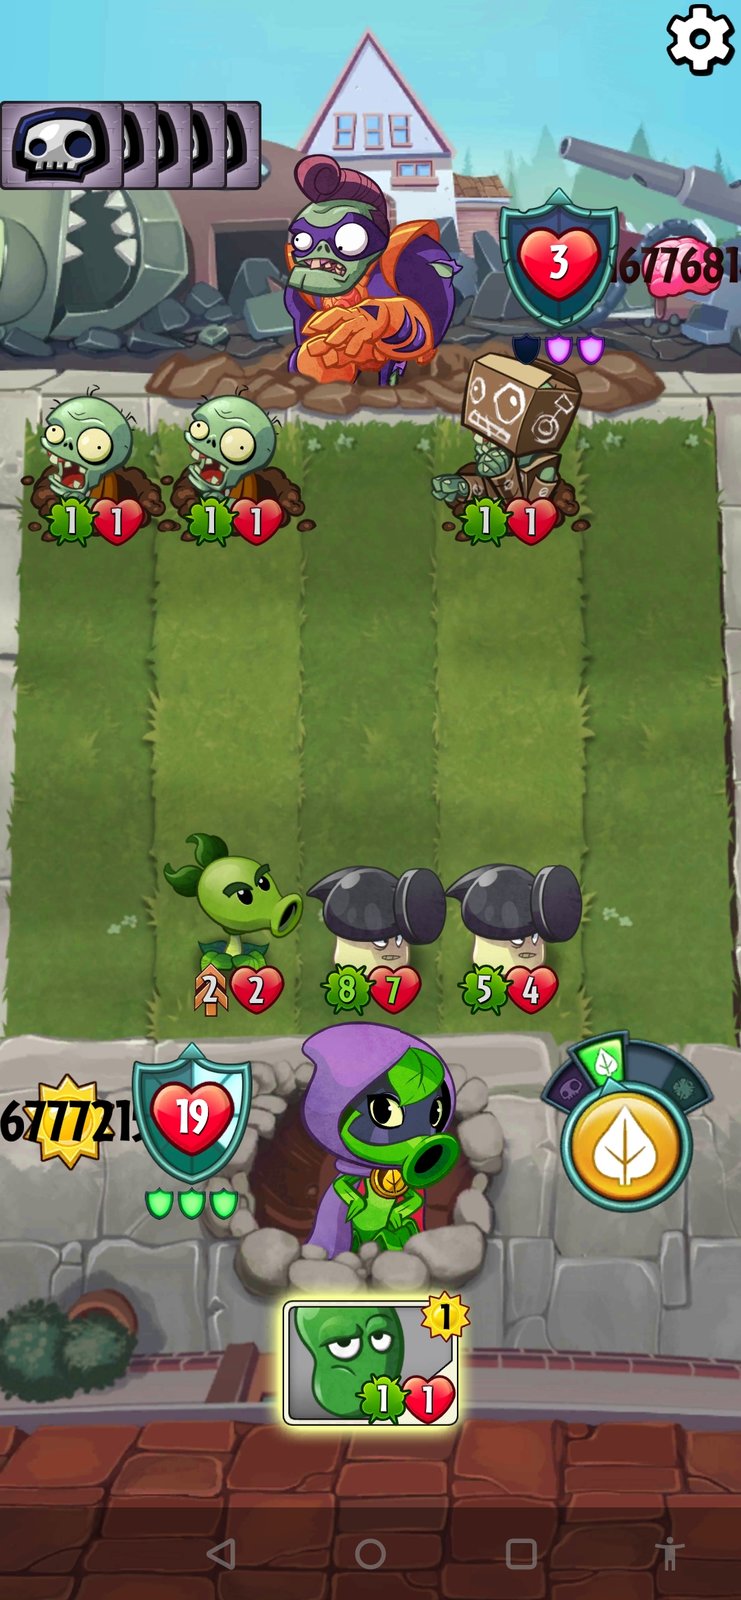 Plants vs. Zombies Heroes HACK MOD APK Android Download